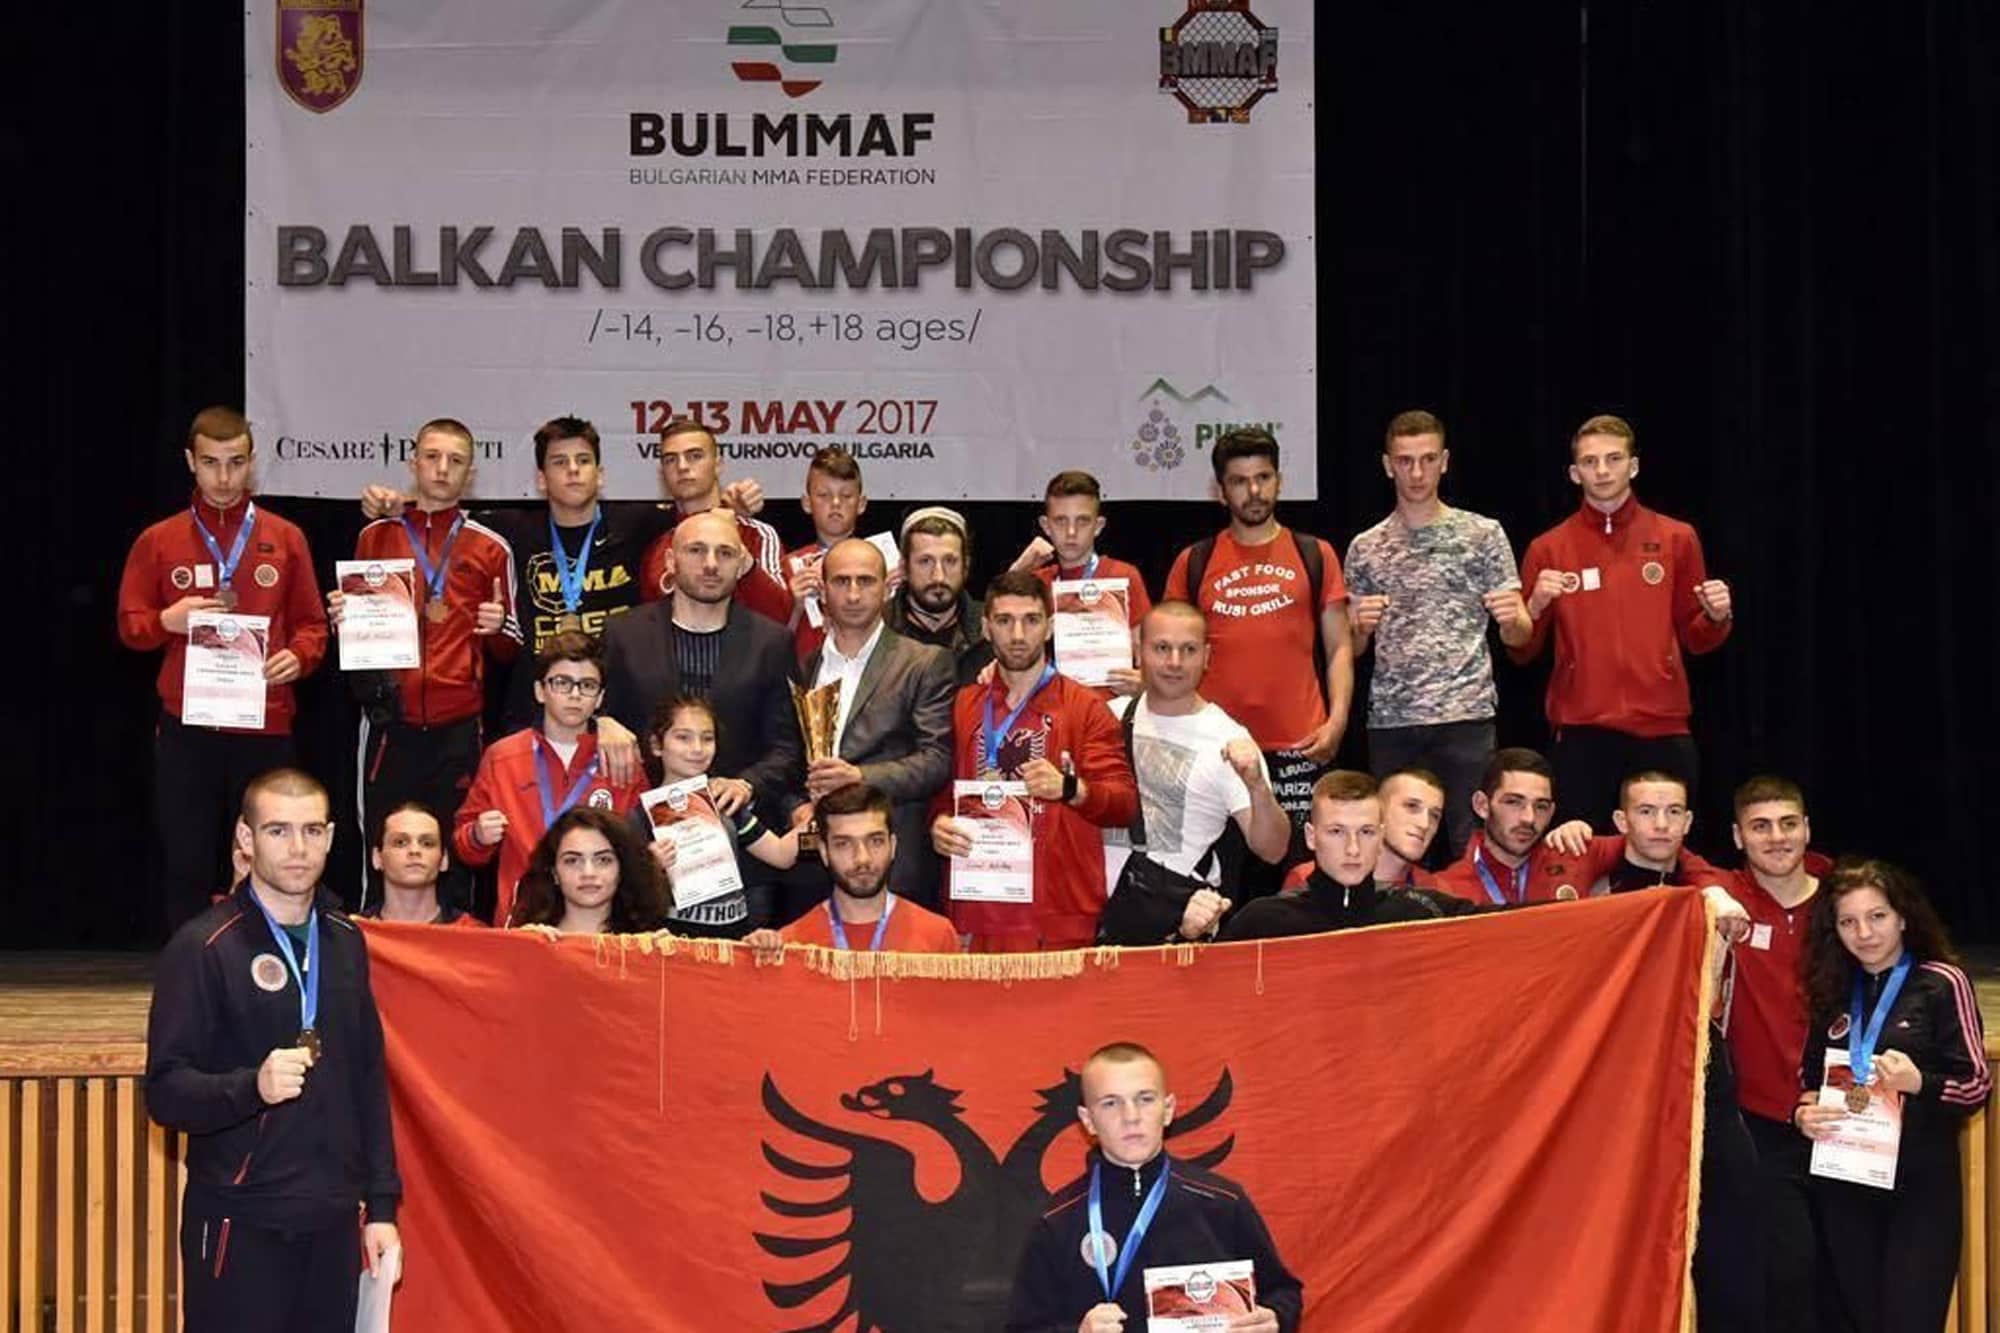 Albanian Free Fighting Federation Accepted as a Member of the Albanian National Olympic Committee